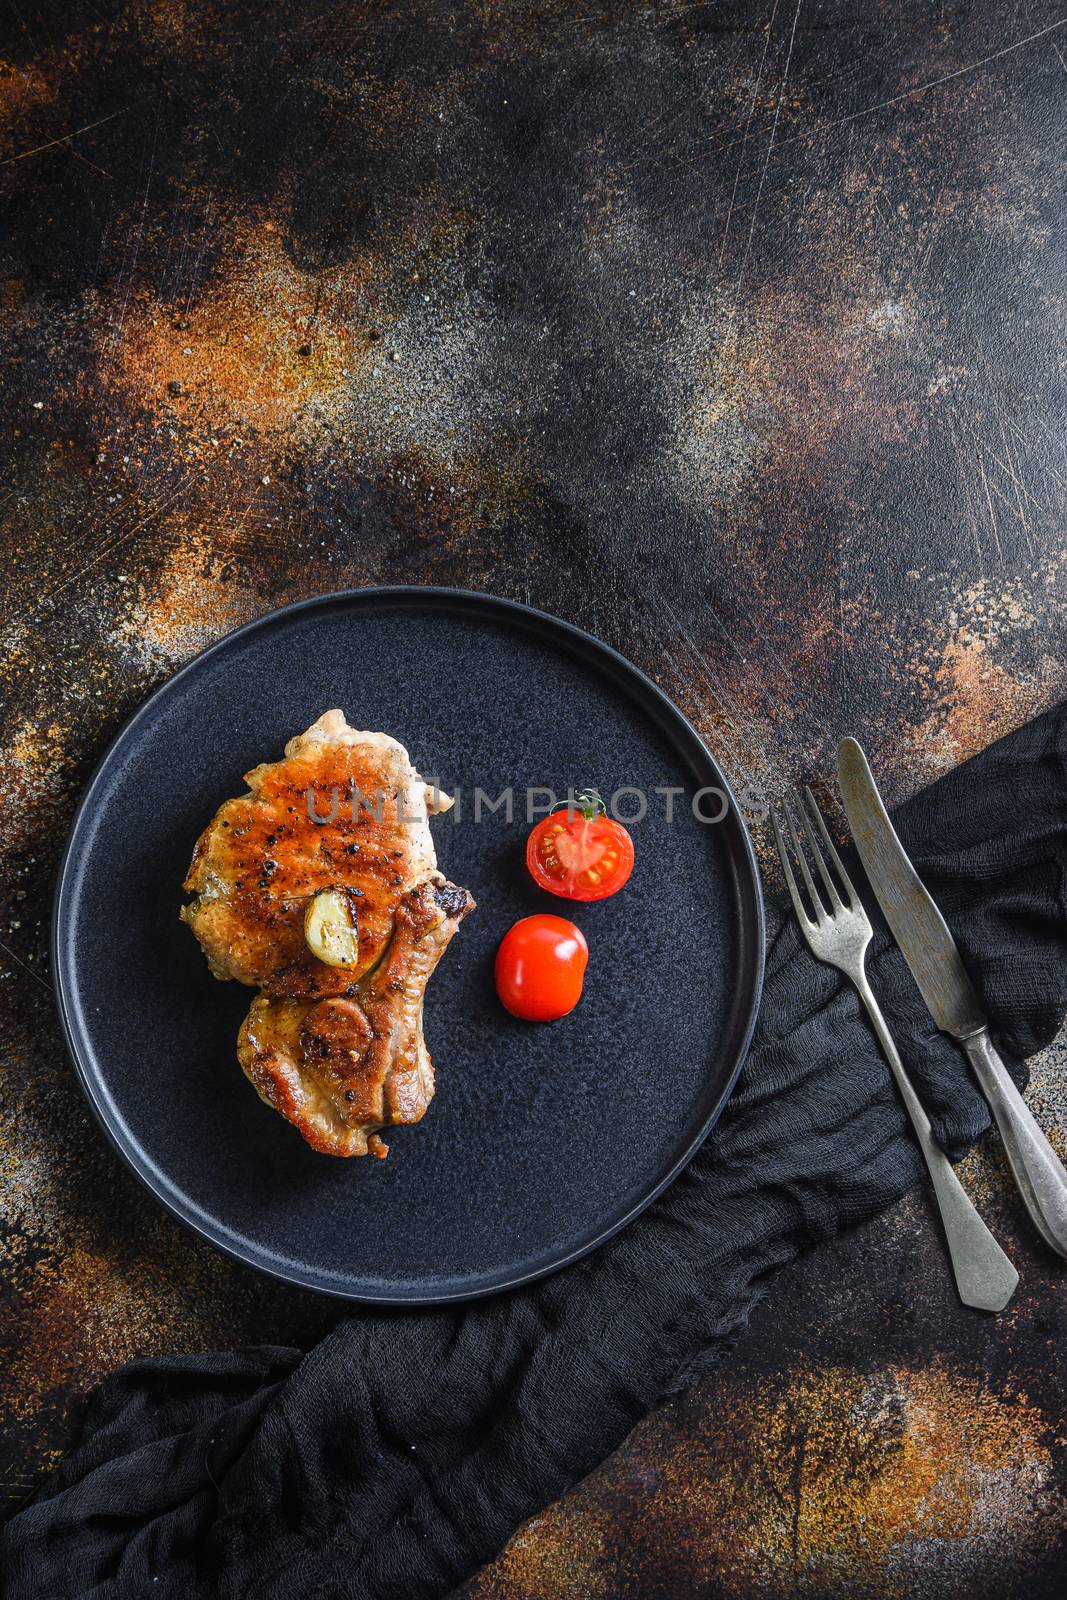 Grilled pork steak on the bone with seasonings on black dish with sfork and knife on cloth, over rustic metall surface overhead top view vertical space for text on top.